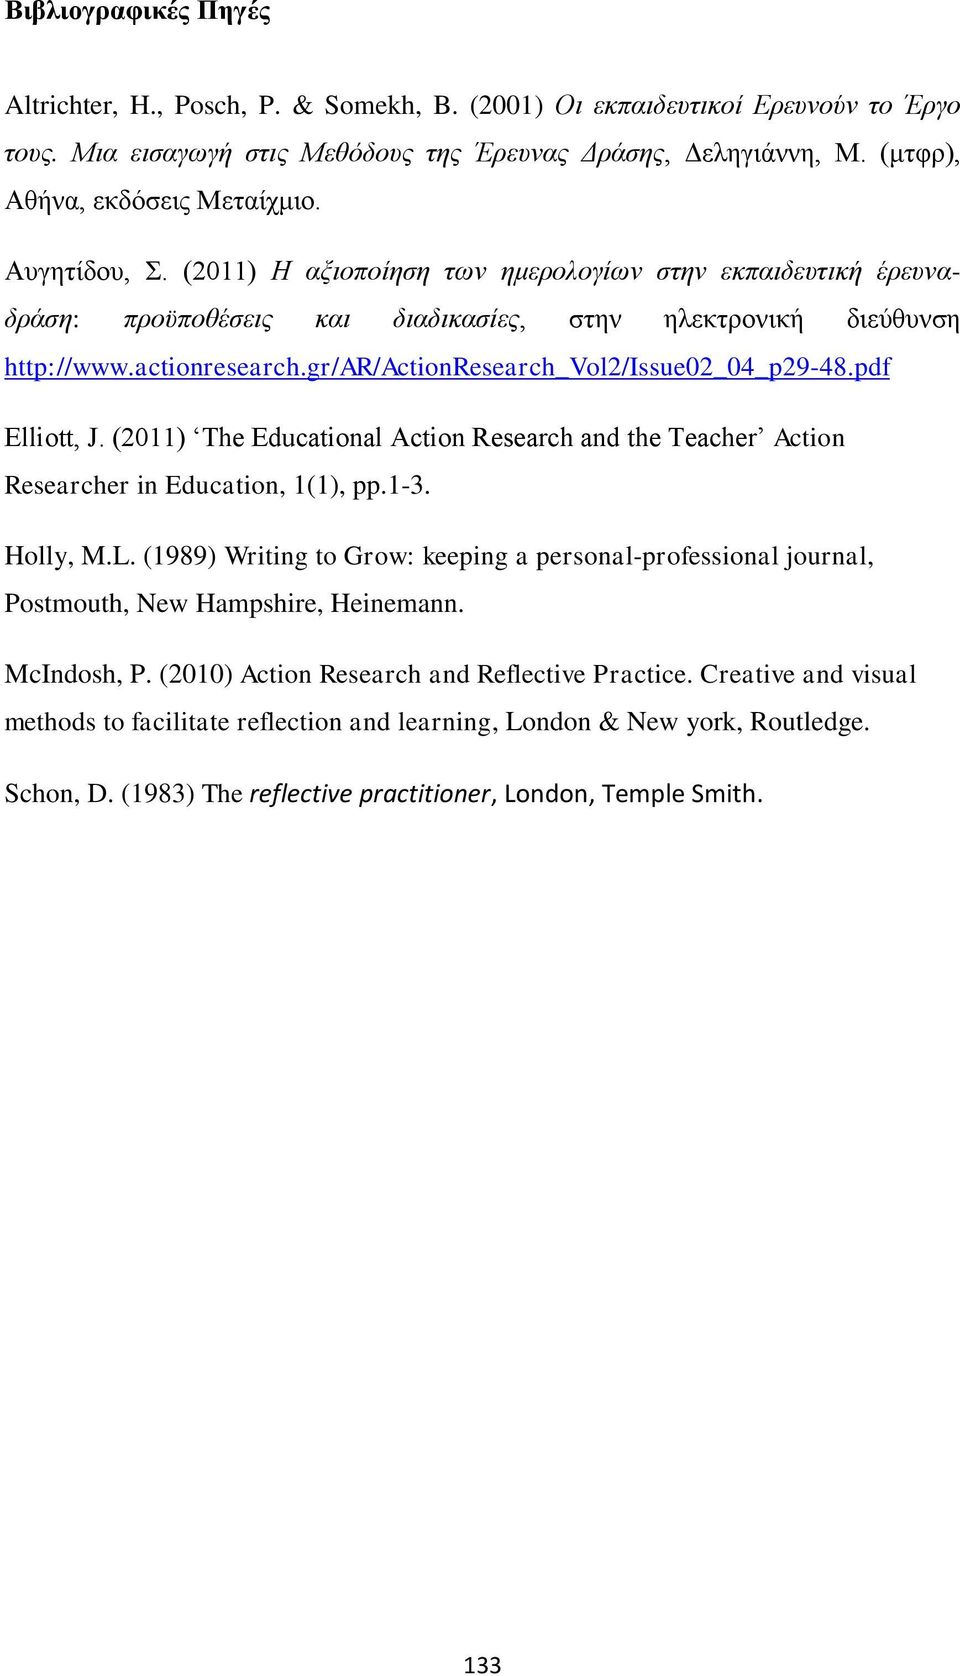 gr/ar/actionresearch_vol2/issue02_04_p29-48.pdf Elliott, J. (2011) The Educational Action Research and the Teacher Action Researcher in Education, 1(1), pp.1-3. Holly, M.L.